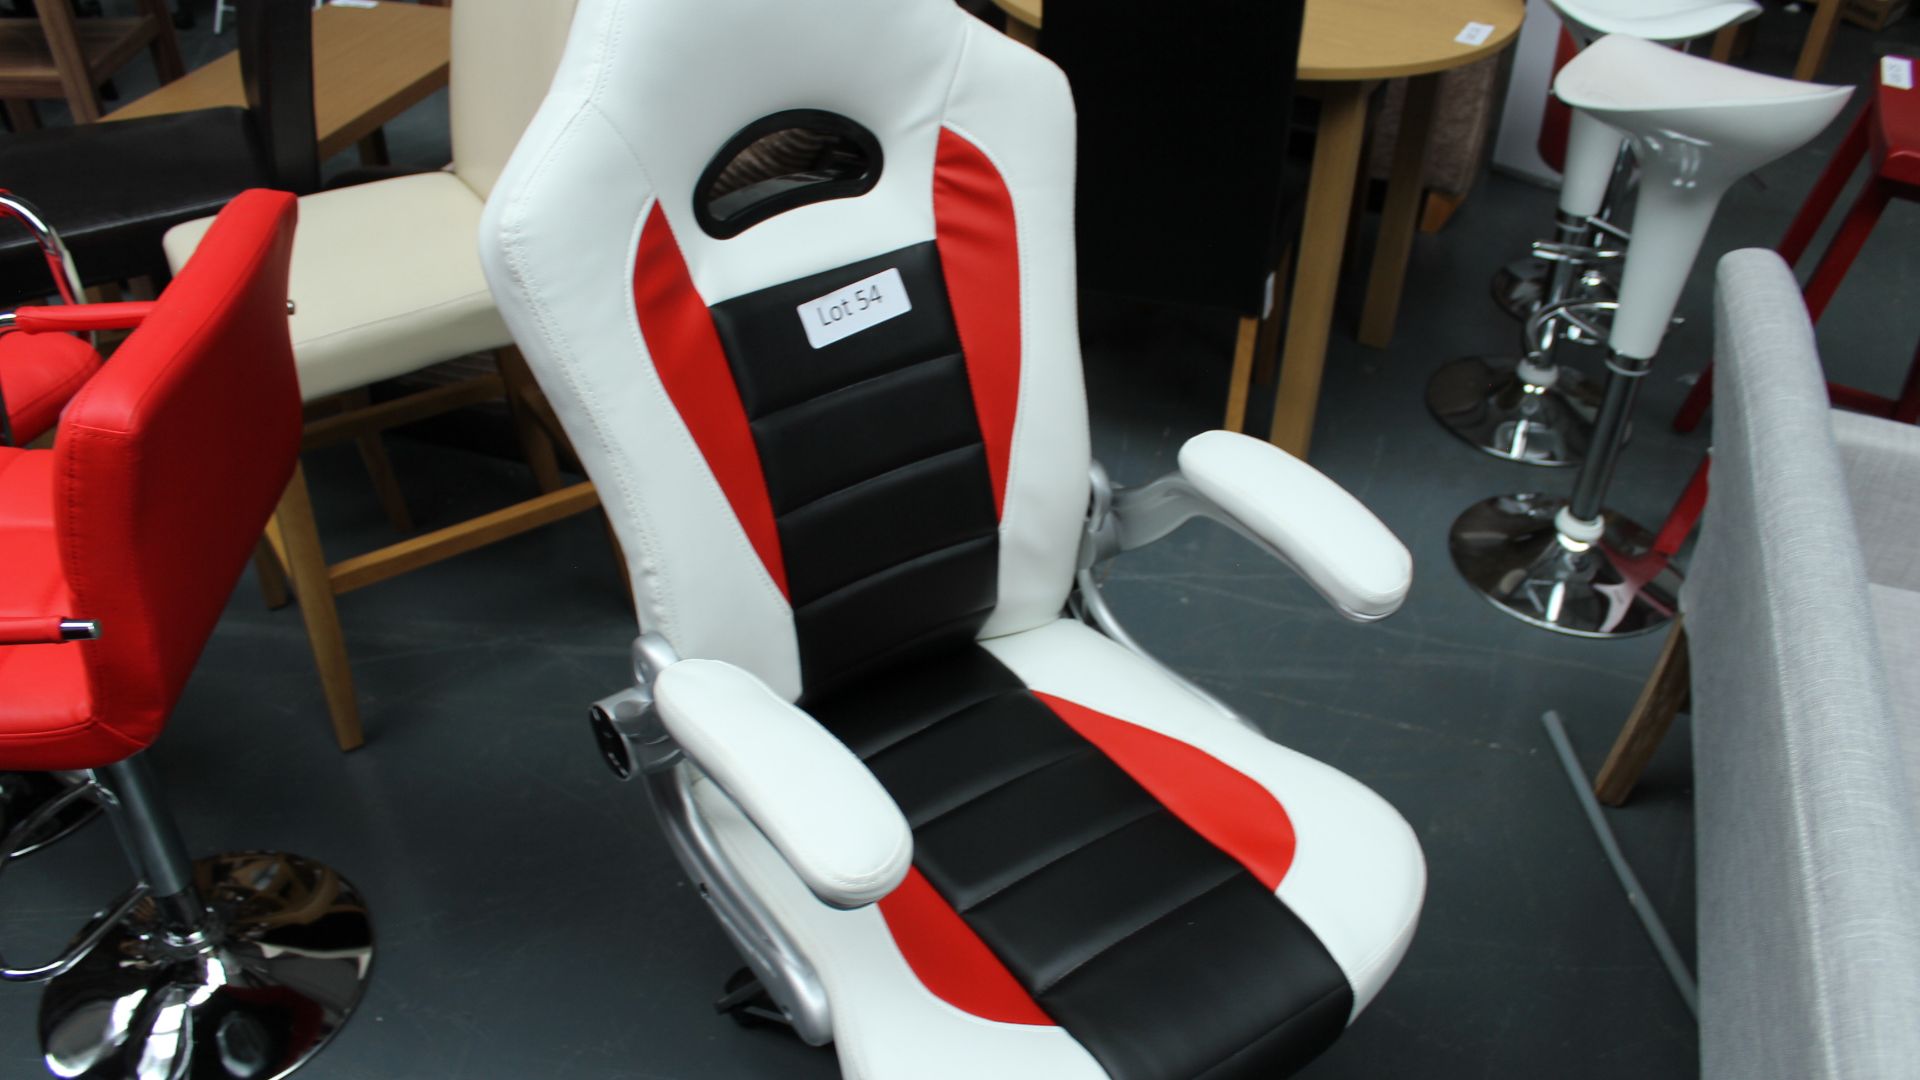 Red, Black & White Computer Chair. New